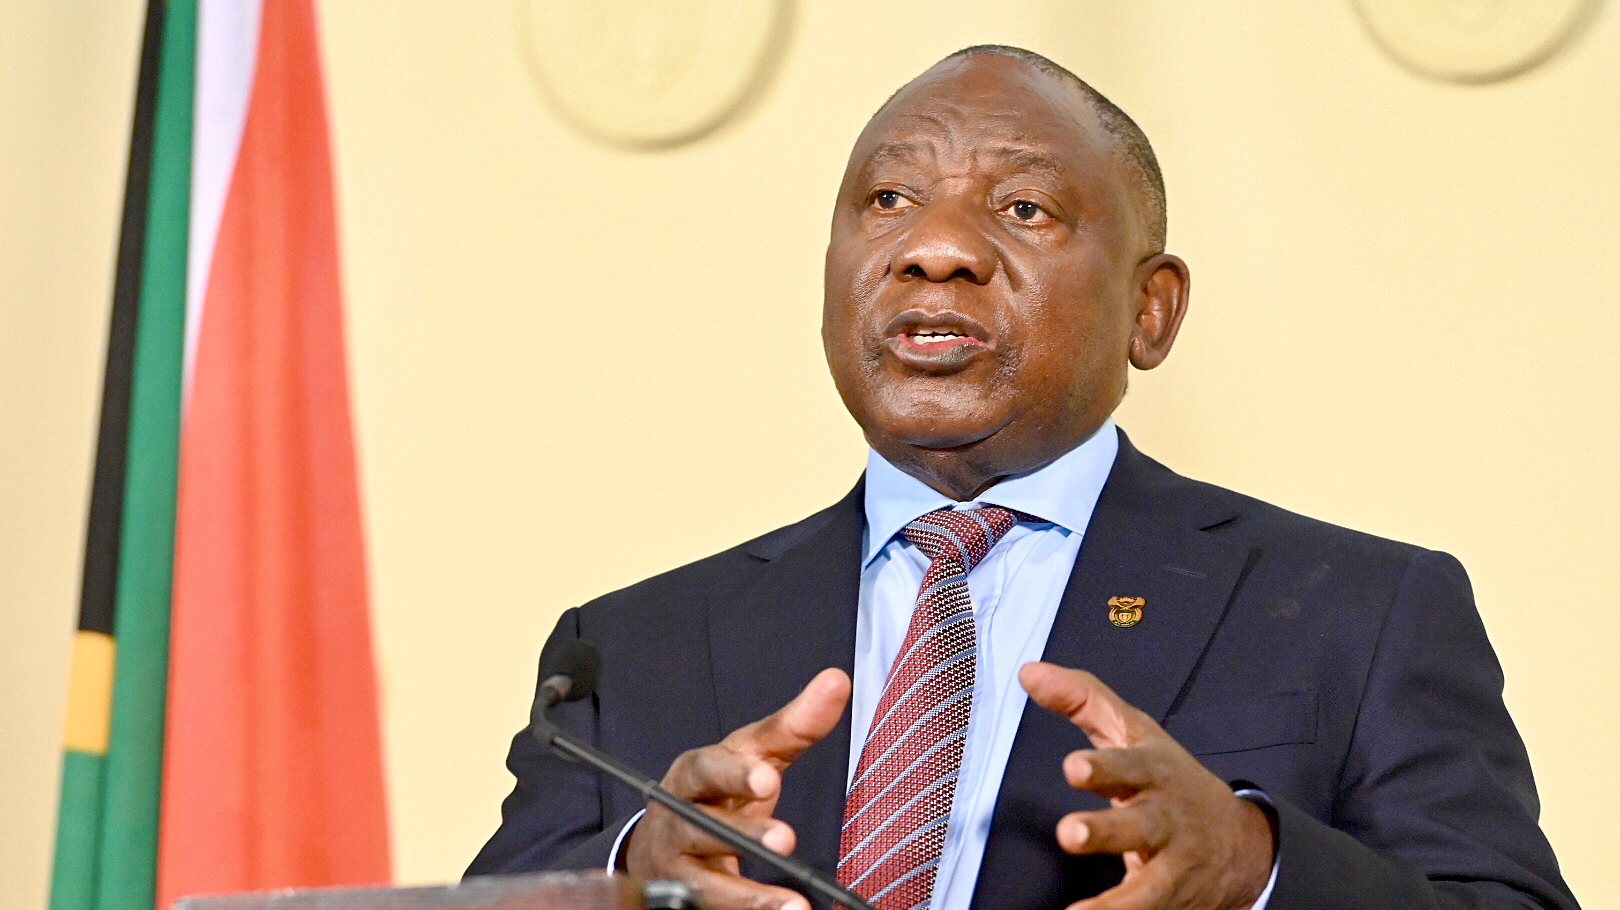 epa09306459 A handout photo made available by the South African Government Communications and Information Systems (GCIS) shows President Cyril Ramaphosa announcing new restrictions in an attempt to slow a third wave of Covid-19 across the country, in Pretoria, South Africa, 27 June 2021. South African President Ramaphosa announced the country will move to adjusted alert level 4 with travel in and out of the epicenter Gauteng Province restricted as the country struggles to contain a third wave with a rapidly spreading Delta variant of the Sars-Cov-2 coronavirus that causes the Covid-19 disease.  EPA/Elmond Jiyane/GCIS/ HANDOUT  HANDOUT EDITORIAL USE ONLY/NO SALES